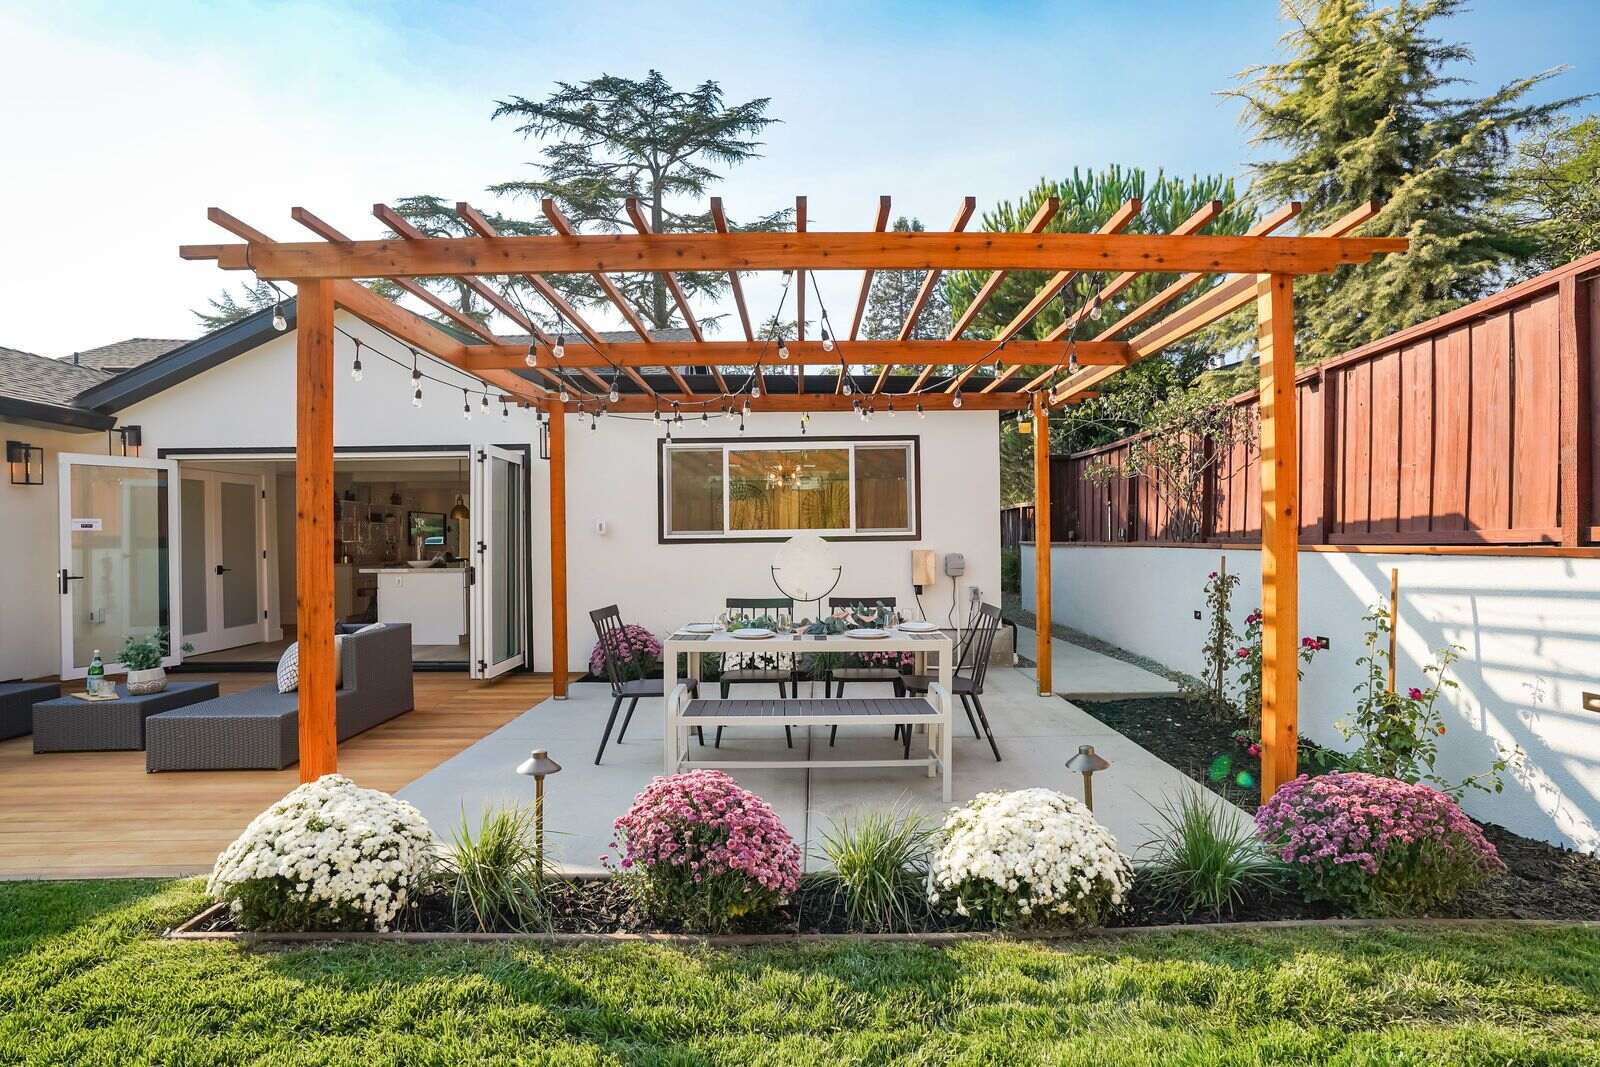 How To Build A Pergola On A Patio